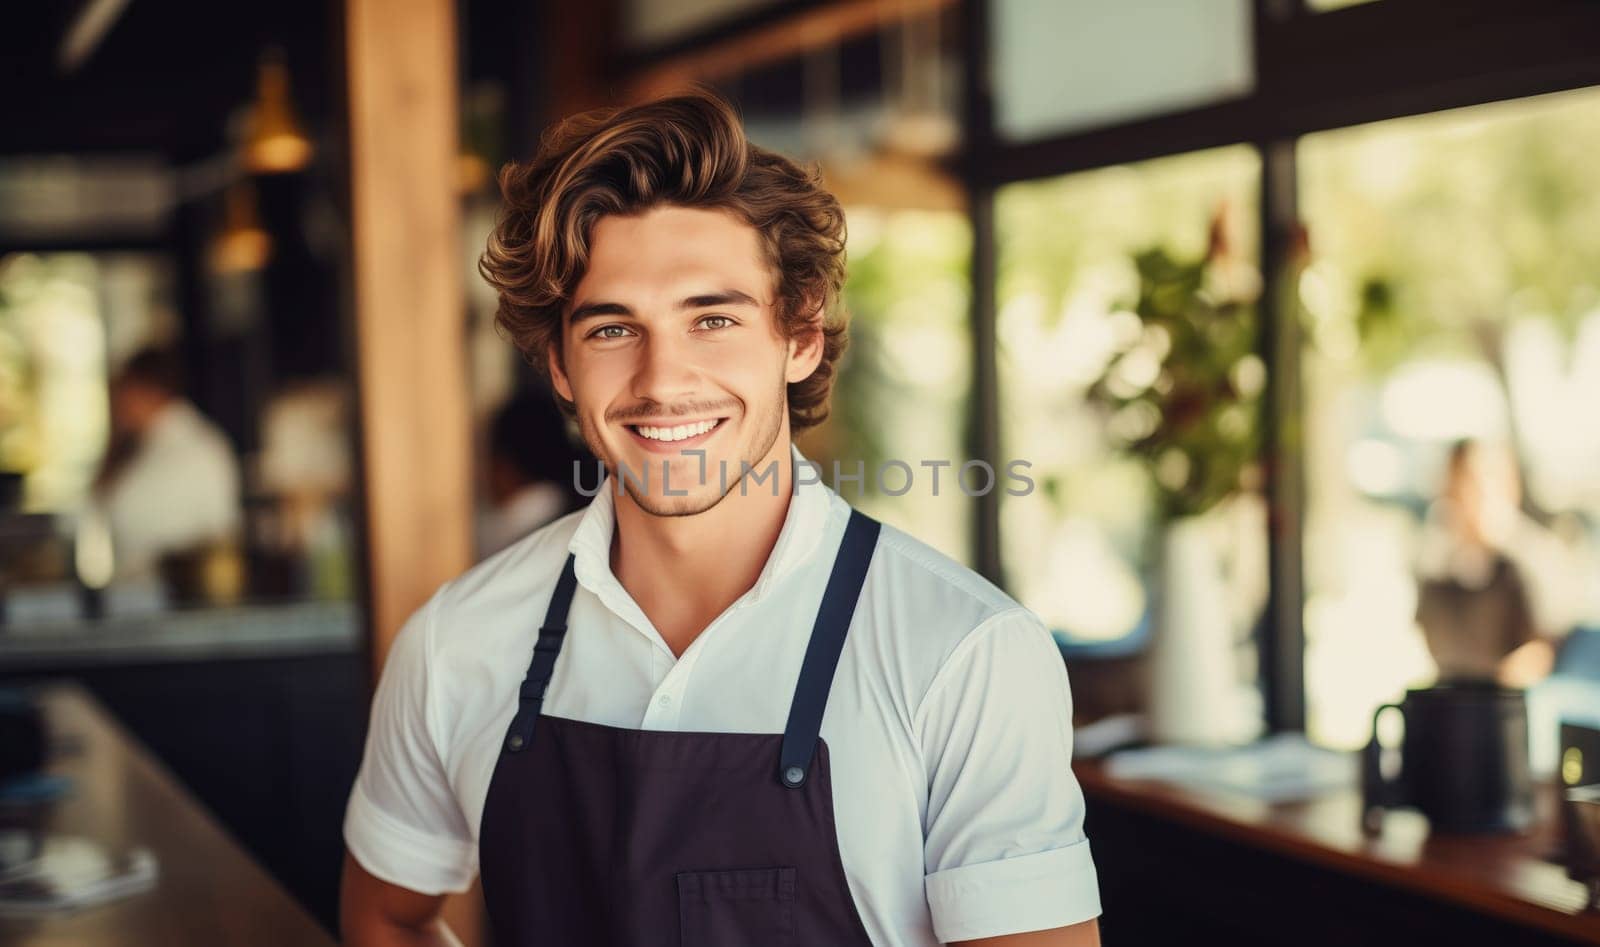 Portrait of happy smiling man barista, coffee house or cafe worker, young waiter working in coffee shop, looking at camera